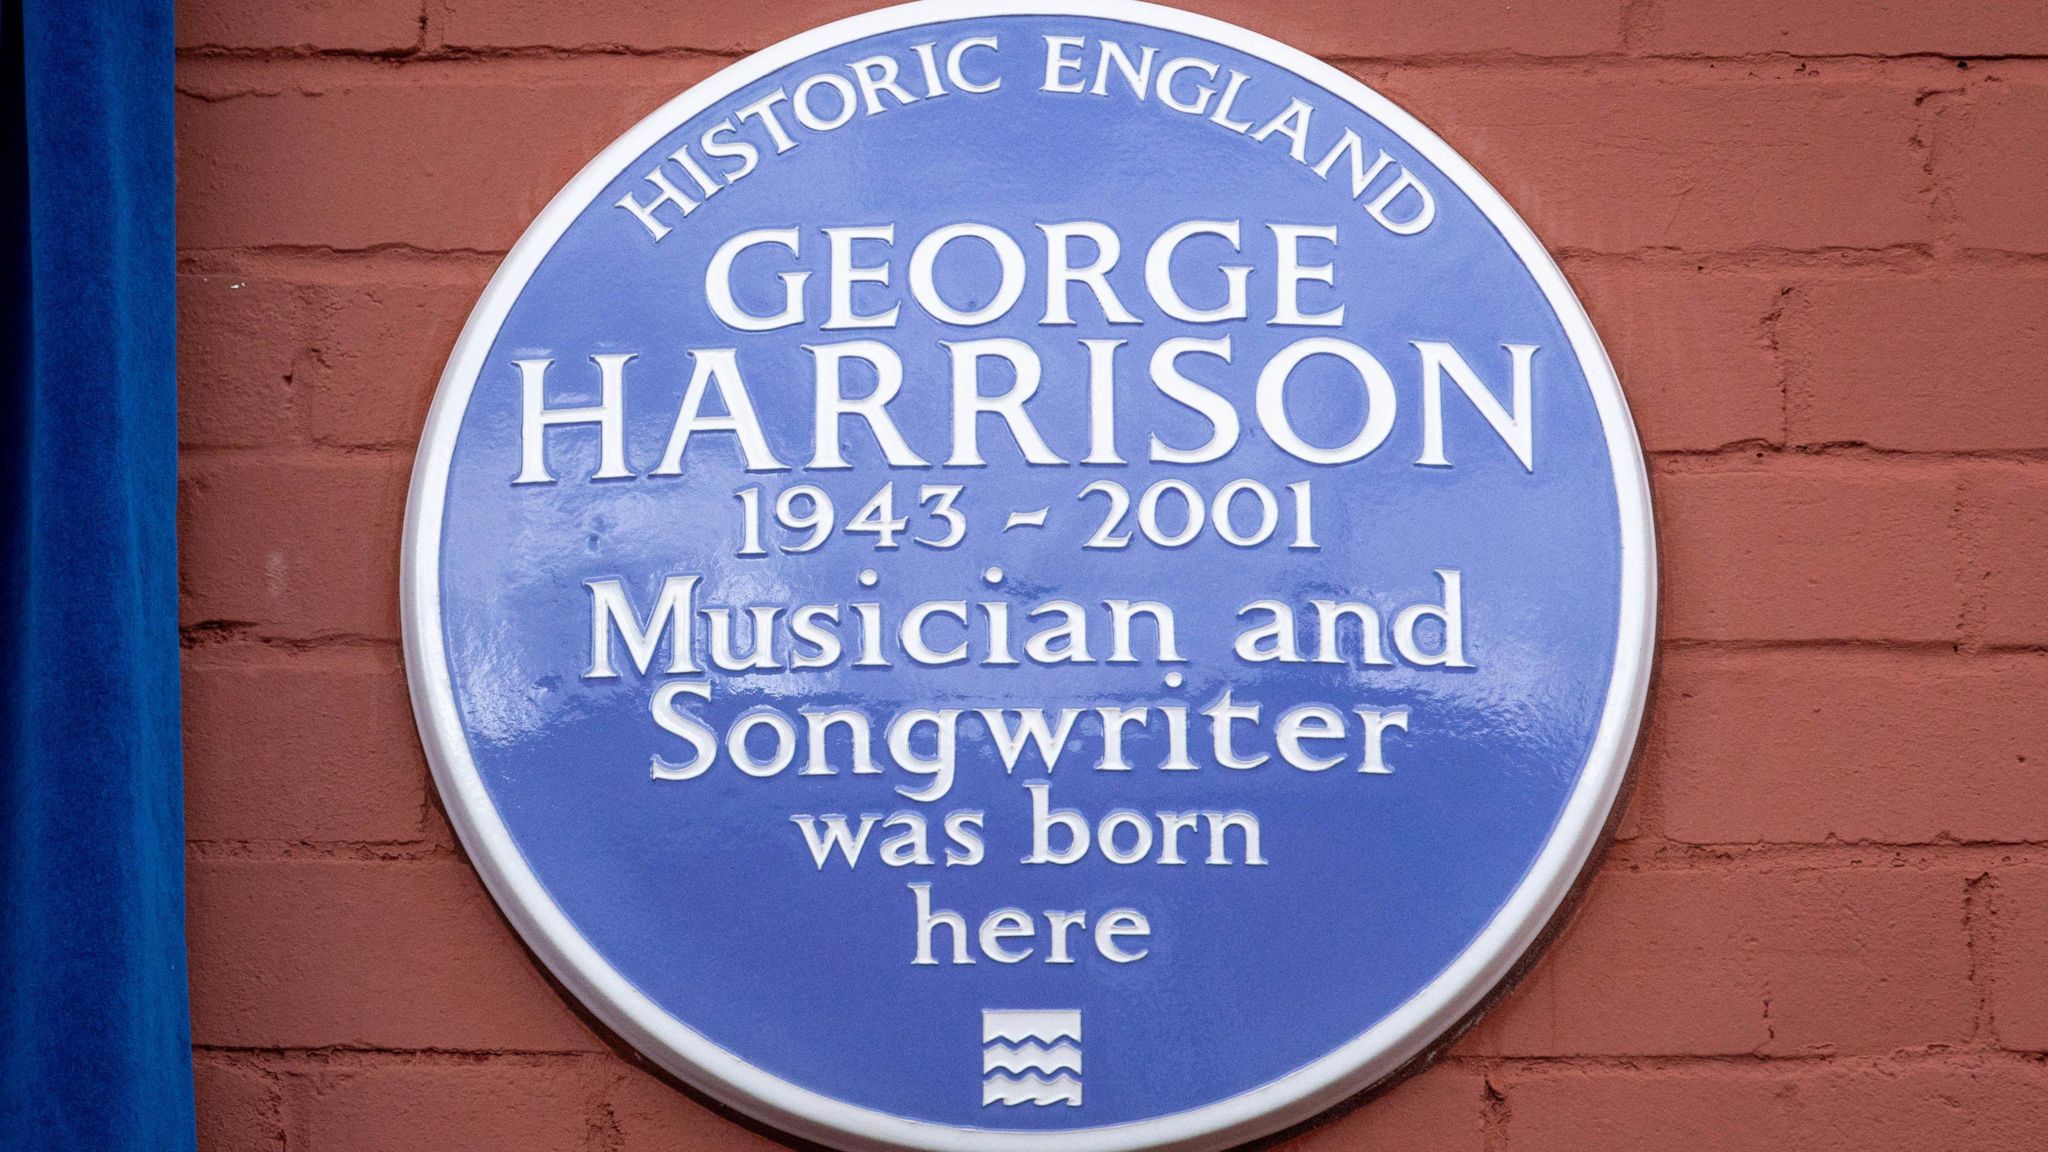 George Harrison plaque at Arnold Grove, Liveprool